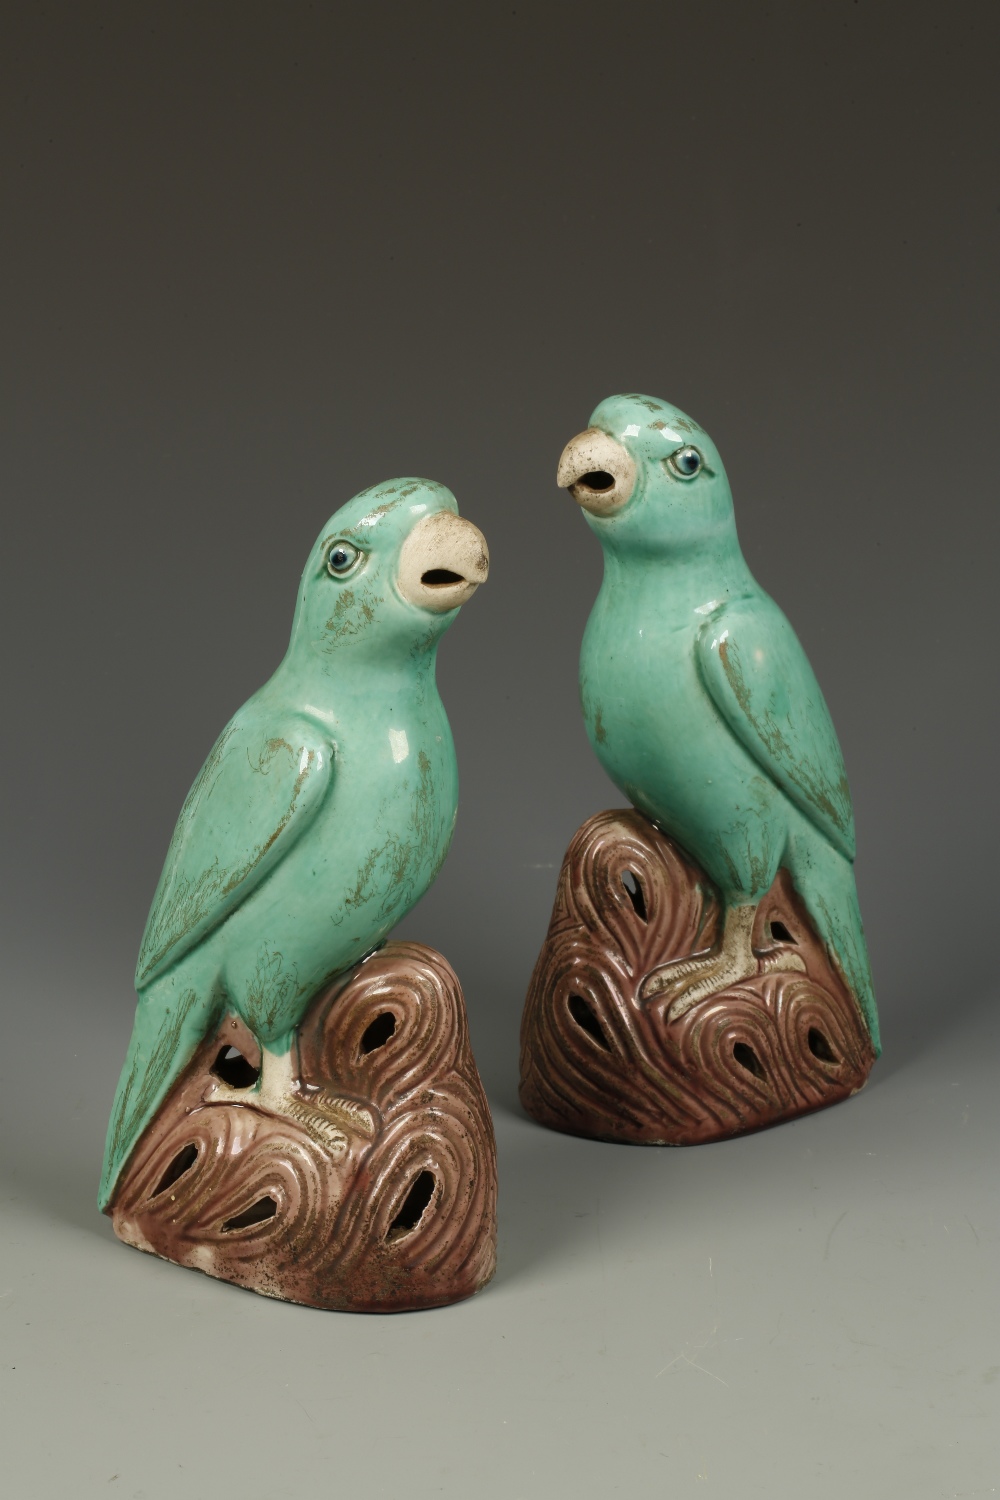 A PAIR OF CHINESE BISCUIT-GLAZED BIRDS, each with its` head raised and standing on rocks, Qing, 8.